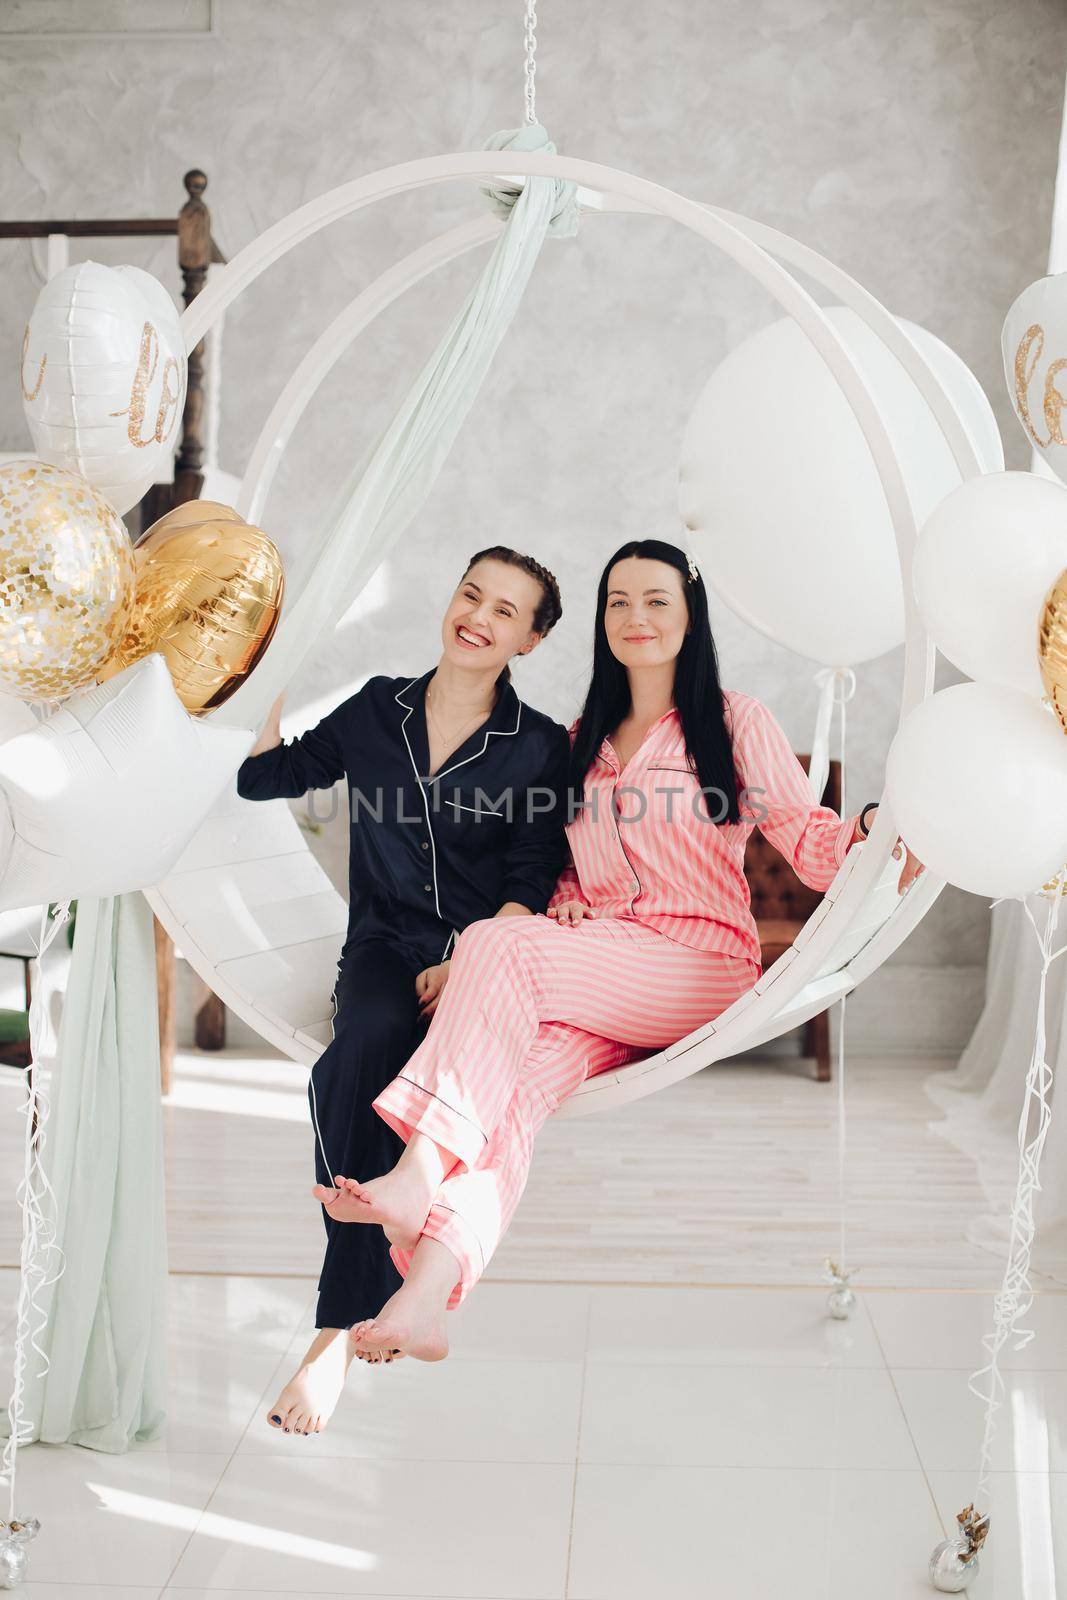 Two happy female friend in pajamas sitting on stylish armchair at luxury interior. Smiling girlfriends enjoying friendship surrounded by festive party event having positive emotion